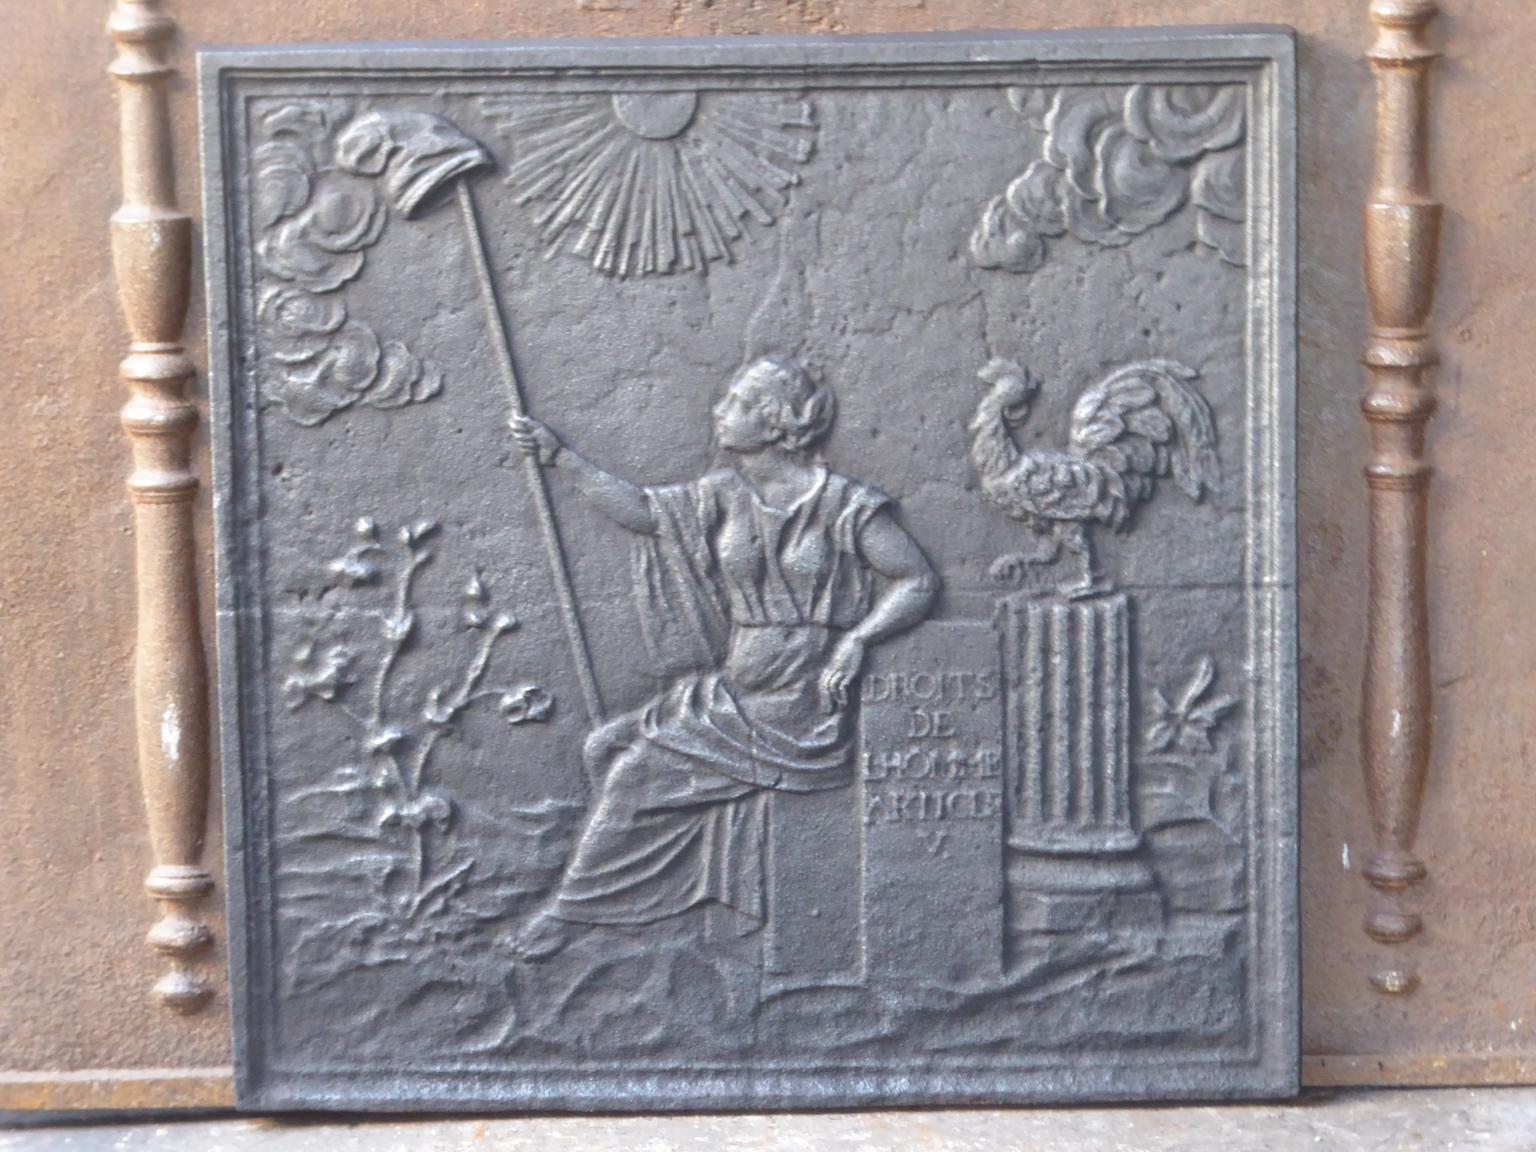 20th century French Napoleon III style fireback with an allegory of France.

The fireback is made of cast iron and has a black / pewter patina. It is in a good condition and does not have cracks.